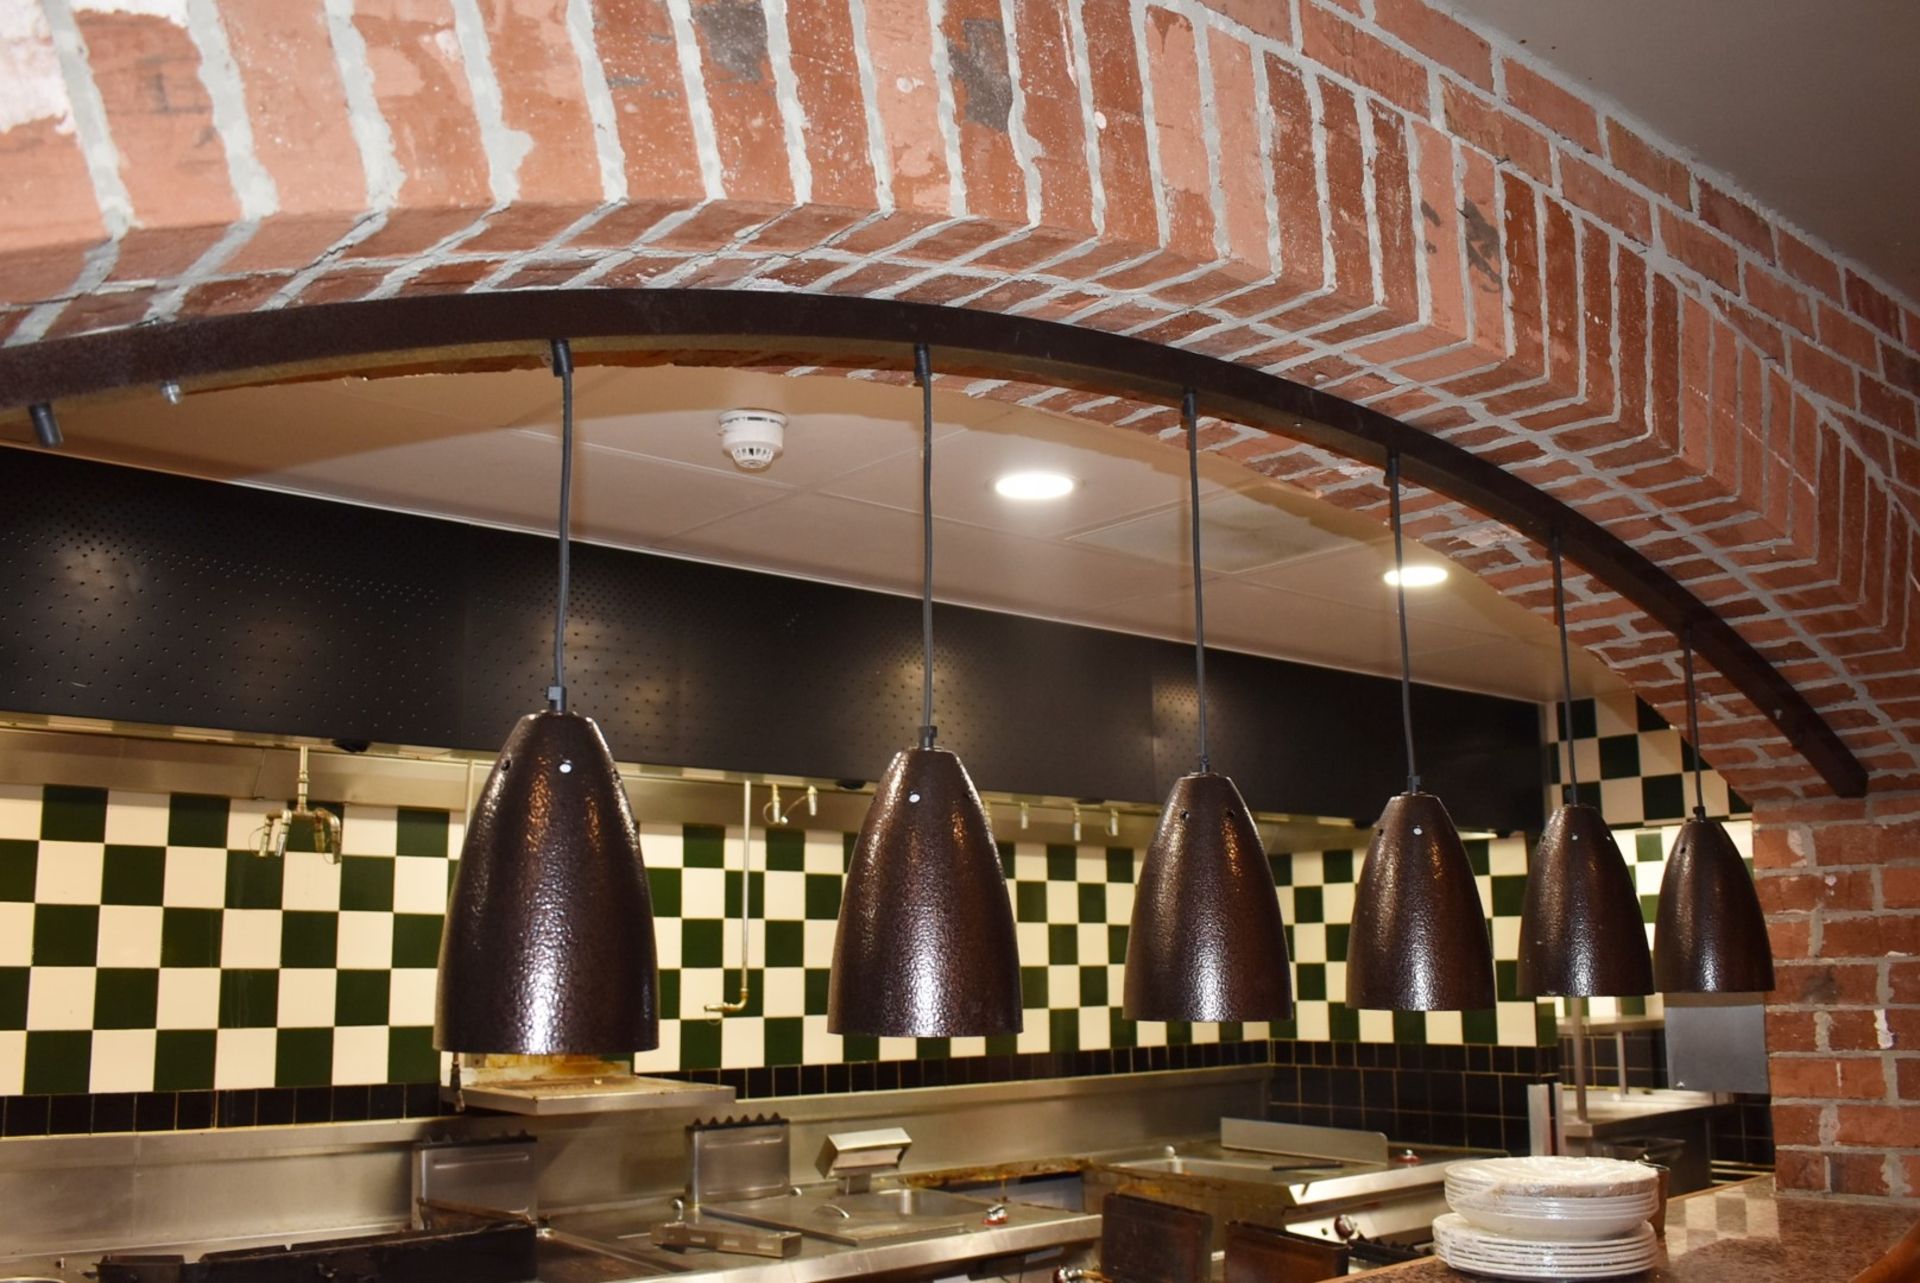 6 x Food Warming Heat Lamps On A Curved Mounting Bracket, For Passthrough Server Areas - From a